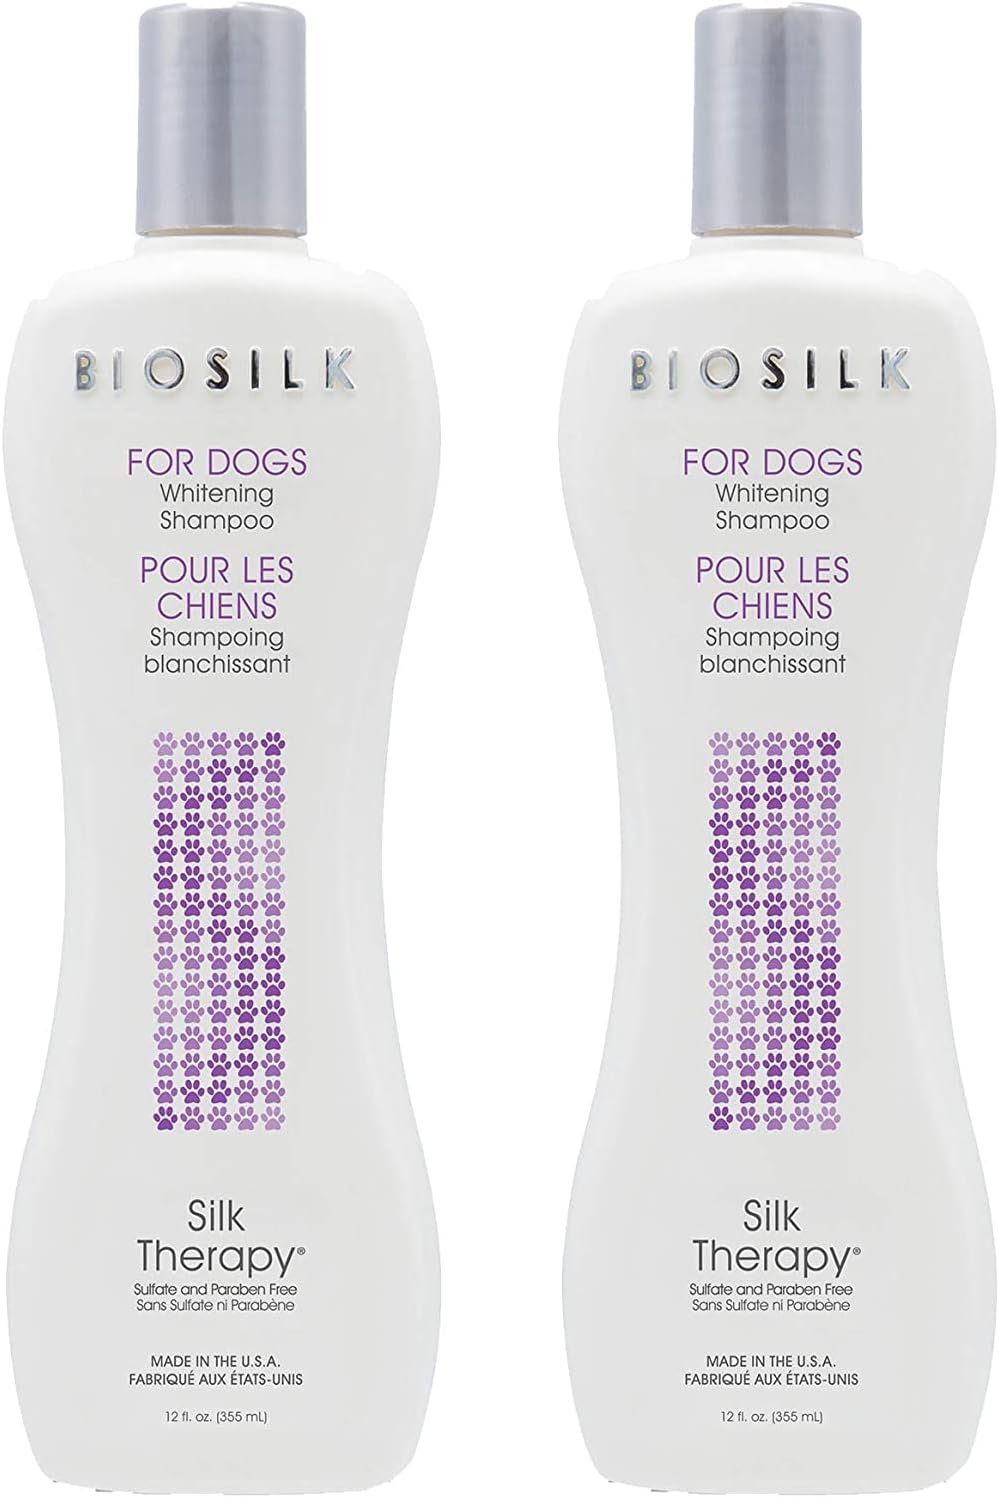 BioSilk for Dogs Silk Therapy Whitening Shampoo | Best Brightening Dog Shampoo for White Dogs to Keep A Clean, White Coat, 12 Oz Shampoo Bottle for All Dogs, Pack of 2